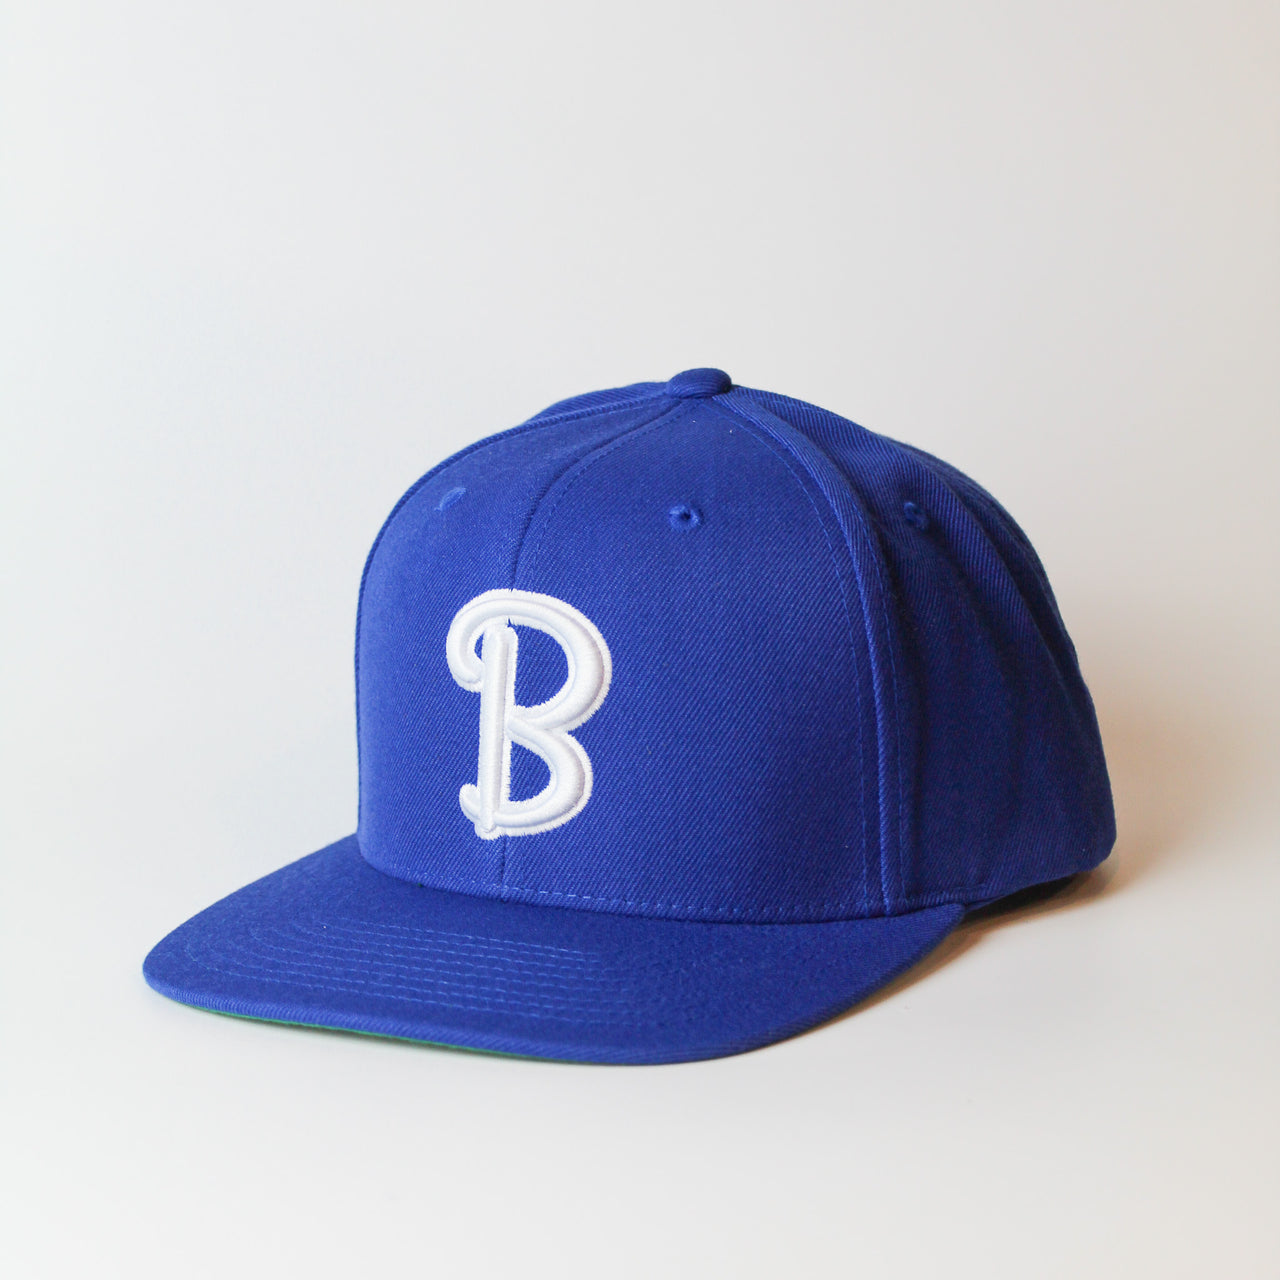 Beachwood "B" Snapback in Blue with White embroidery